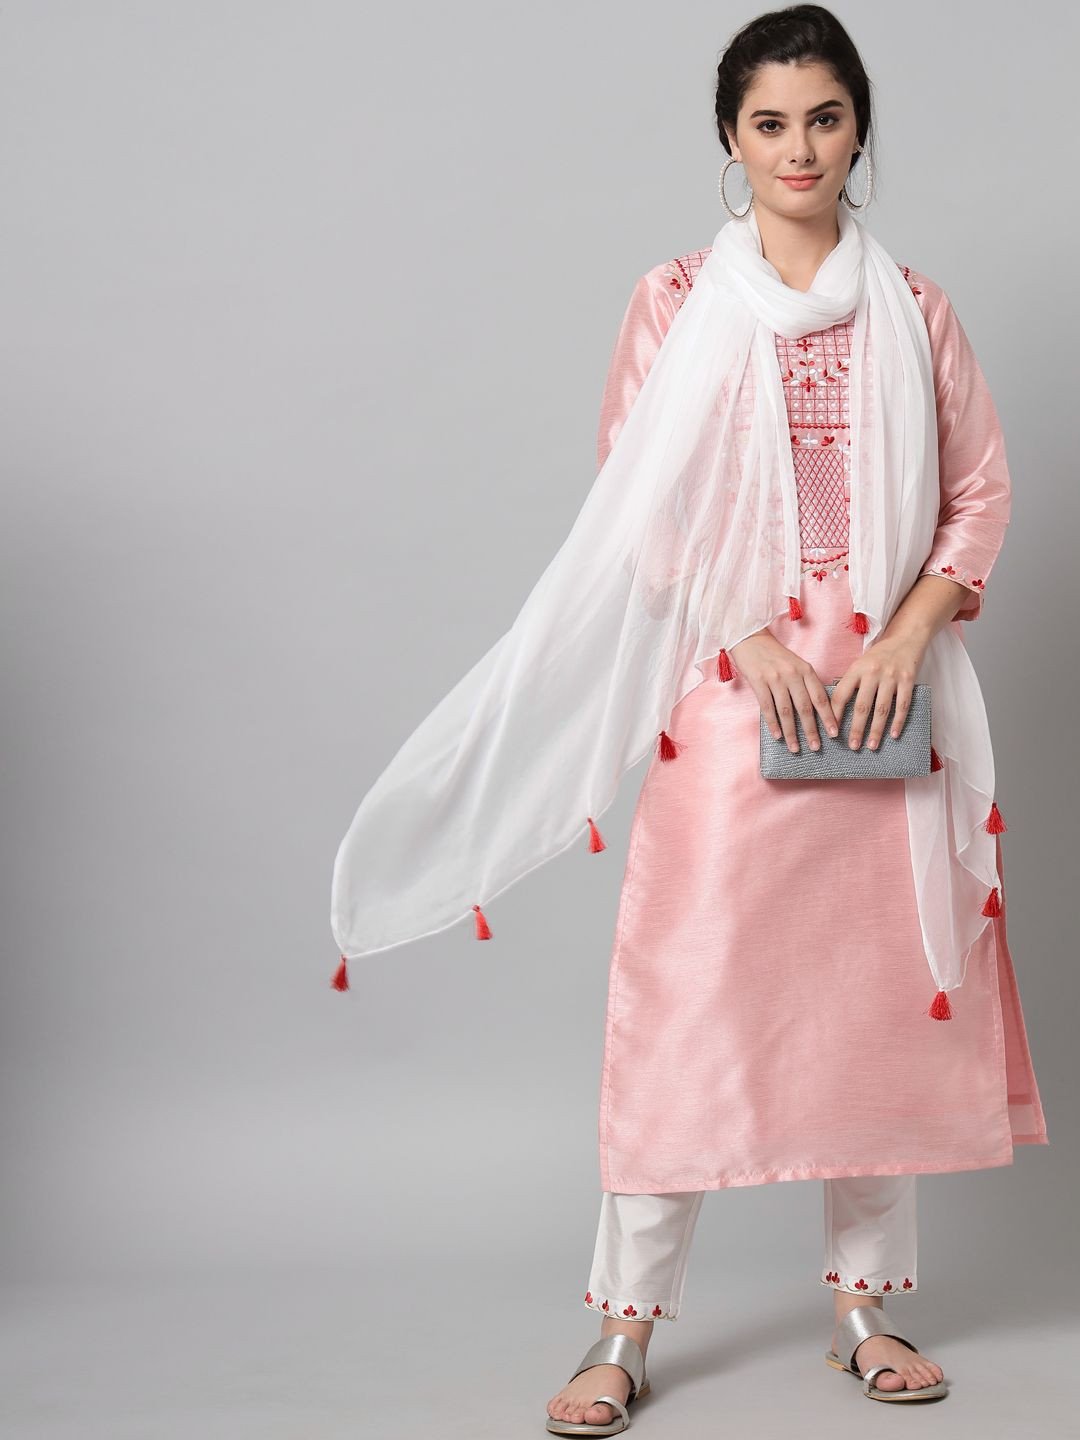 Pink kurta trouser set with white and red floral embroidery